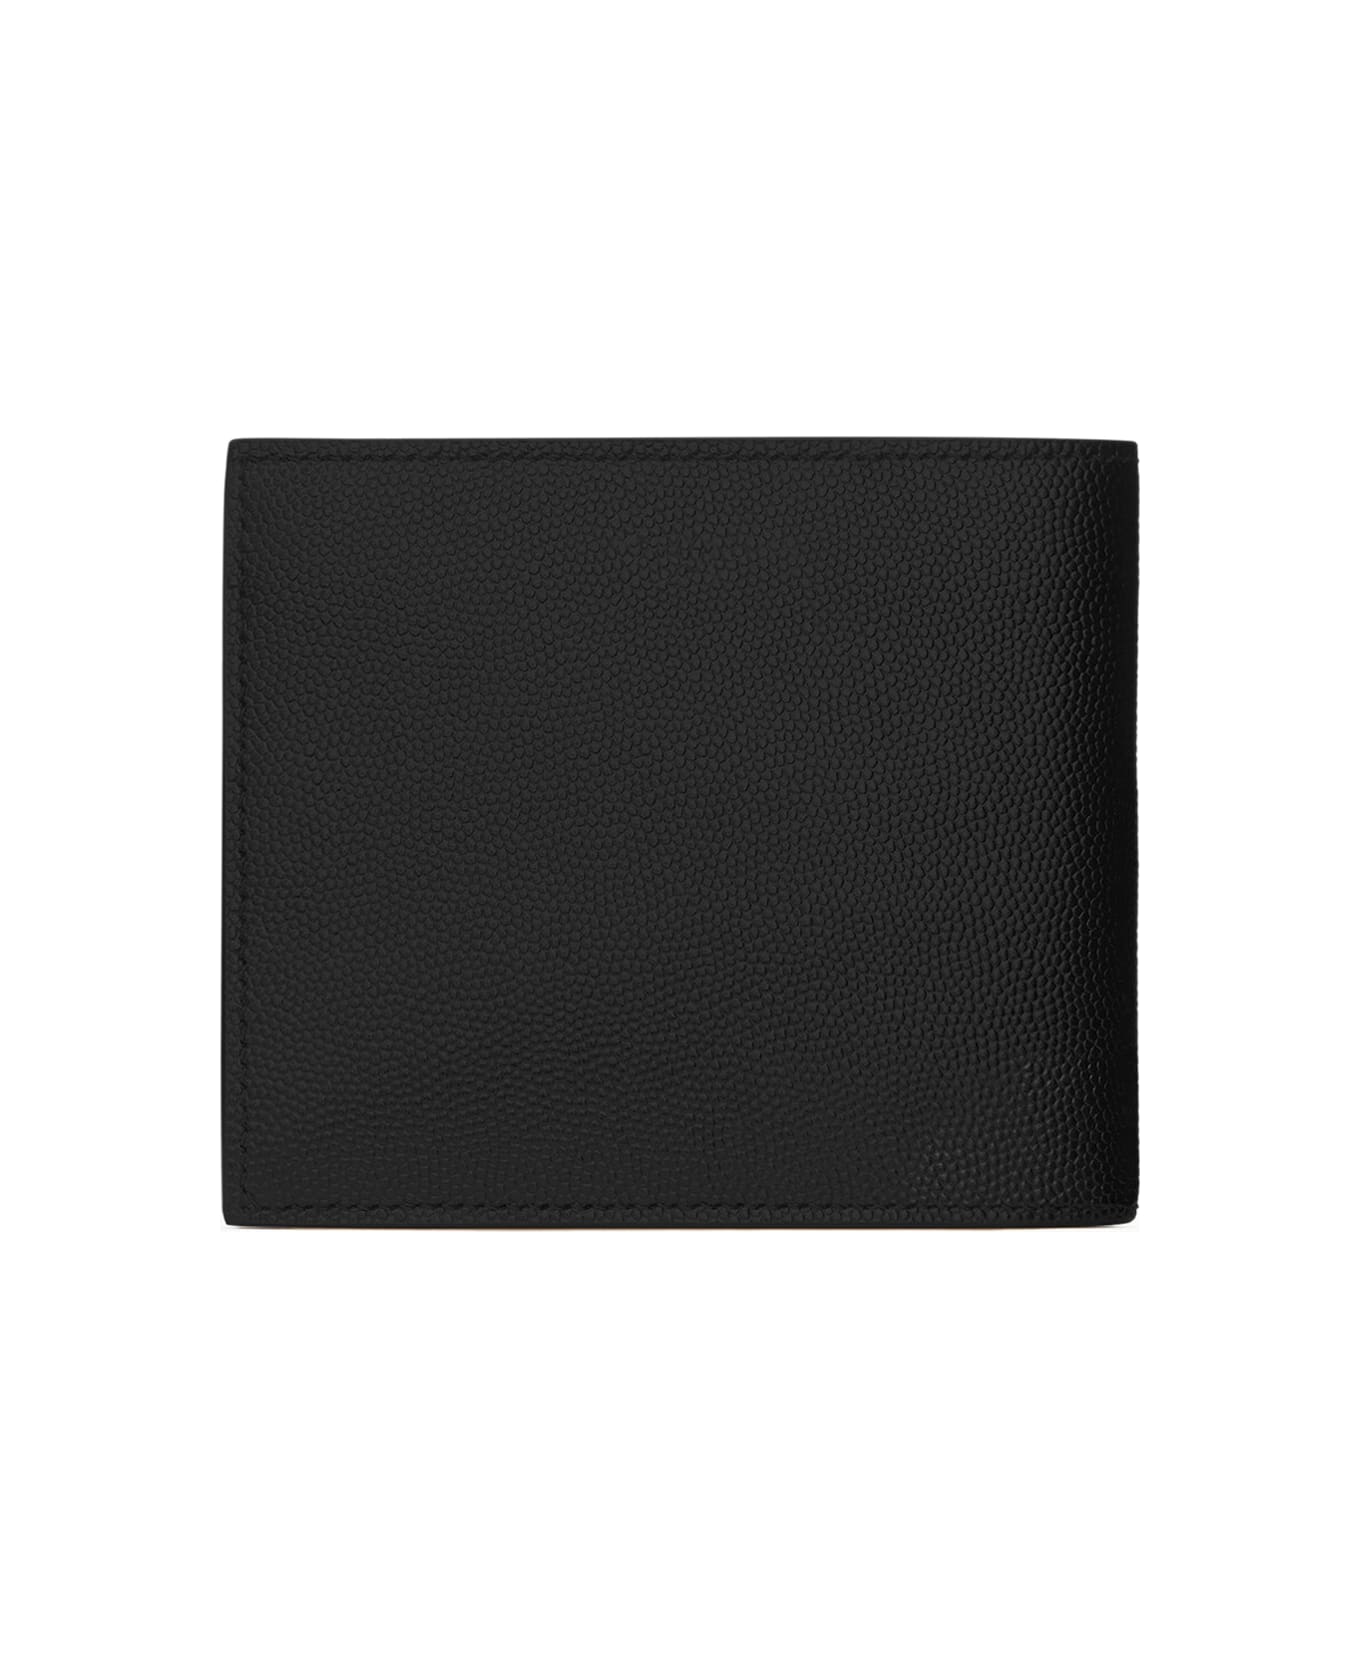 Saint Laurent Wallet In Leather With Coin Purse - Black 財布